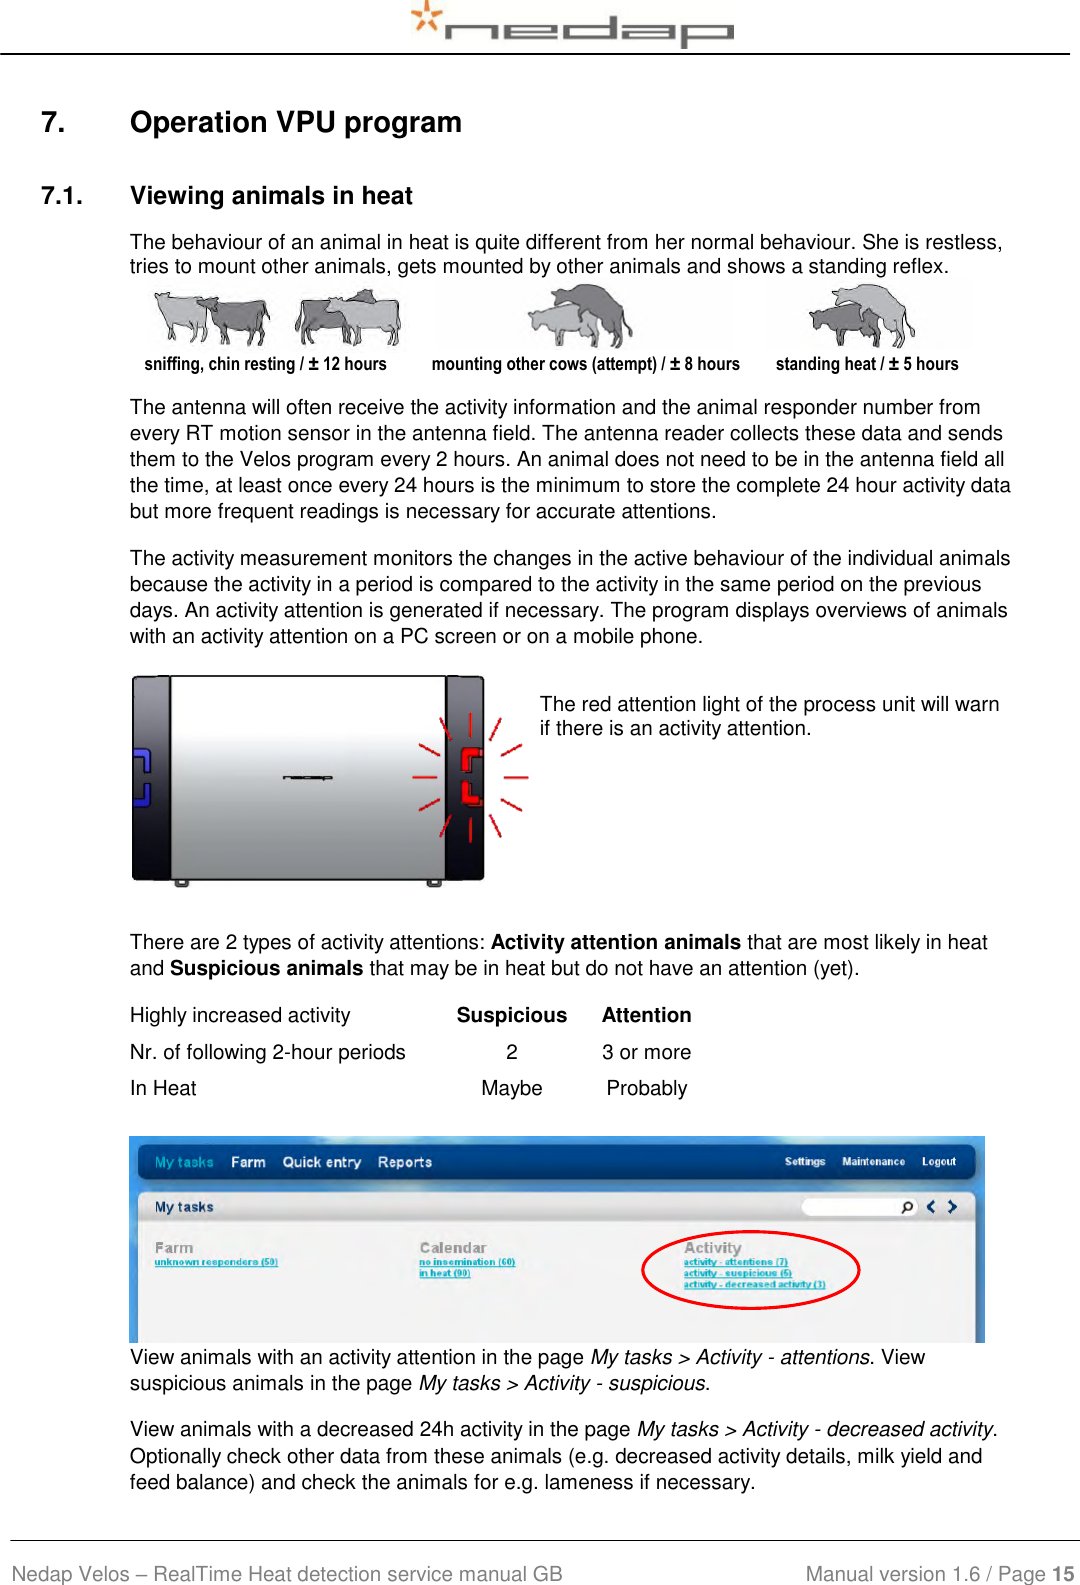  Nedap Velos – RealTime Heat detection service manual GB                            Manual version 1.6 / Page 15  7.  Operation VPU program 7.1.  Viewing animals in heat The behaviour of an animal in heat is quite different from her normal behaviour. She is restless, tries to mount other animals, gets mounted by other animals and shows a standing reflex.    sniffing, chin resting / ± 12 hours mounting other cows (attempt) / ± 8 hours standing heat / ± 5 hours  The antenna will often receive the activity information and the animal responder number from every RT motion sensor in the antenna field. The antenna reader collects these data and sends them to the Velos program every 2 hours. An animal does not need to be in the antenna field all the time, at least once every 24 hours is the minimum to store the complete 24 hour activity data but more frequent readings is necessary for accurate attentions. The activity measurement monitors the changes in the active behaviour of the individual animals because the activity in a period is compared to the activity in the same period on the previous days. An activity attention is generated if necessary. The program displays overviews of animals with an activity attention on a PC screen or on a mobile phone.       The red attention light of the process unit will warn if there is an activity attention.    There are 2 types of activity attentions: Activity attention animals that are most likely in heat and Suspicious animals that may be in heat but do not have an attention (yet). Highly increased activity Suspicious Attention  Nr. of following 2-hour periods 2 3 or more  In Heat Maybe Probably    View animals with an activity attention in the page My tasks &gt; Activity - attentions. View suspicious animals in the page My tasks &gt; Activity - suspicious.  View animals with a decreased 24h activity in the page My tasks &gt; Activity - decreased activity. Optionally check other data from these animals (e.g. decreased activity details, milk yield and feed balance) and check the animals for e.g. lameness if necessary.